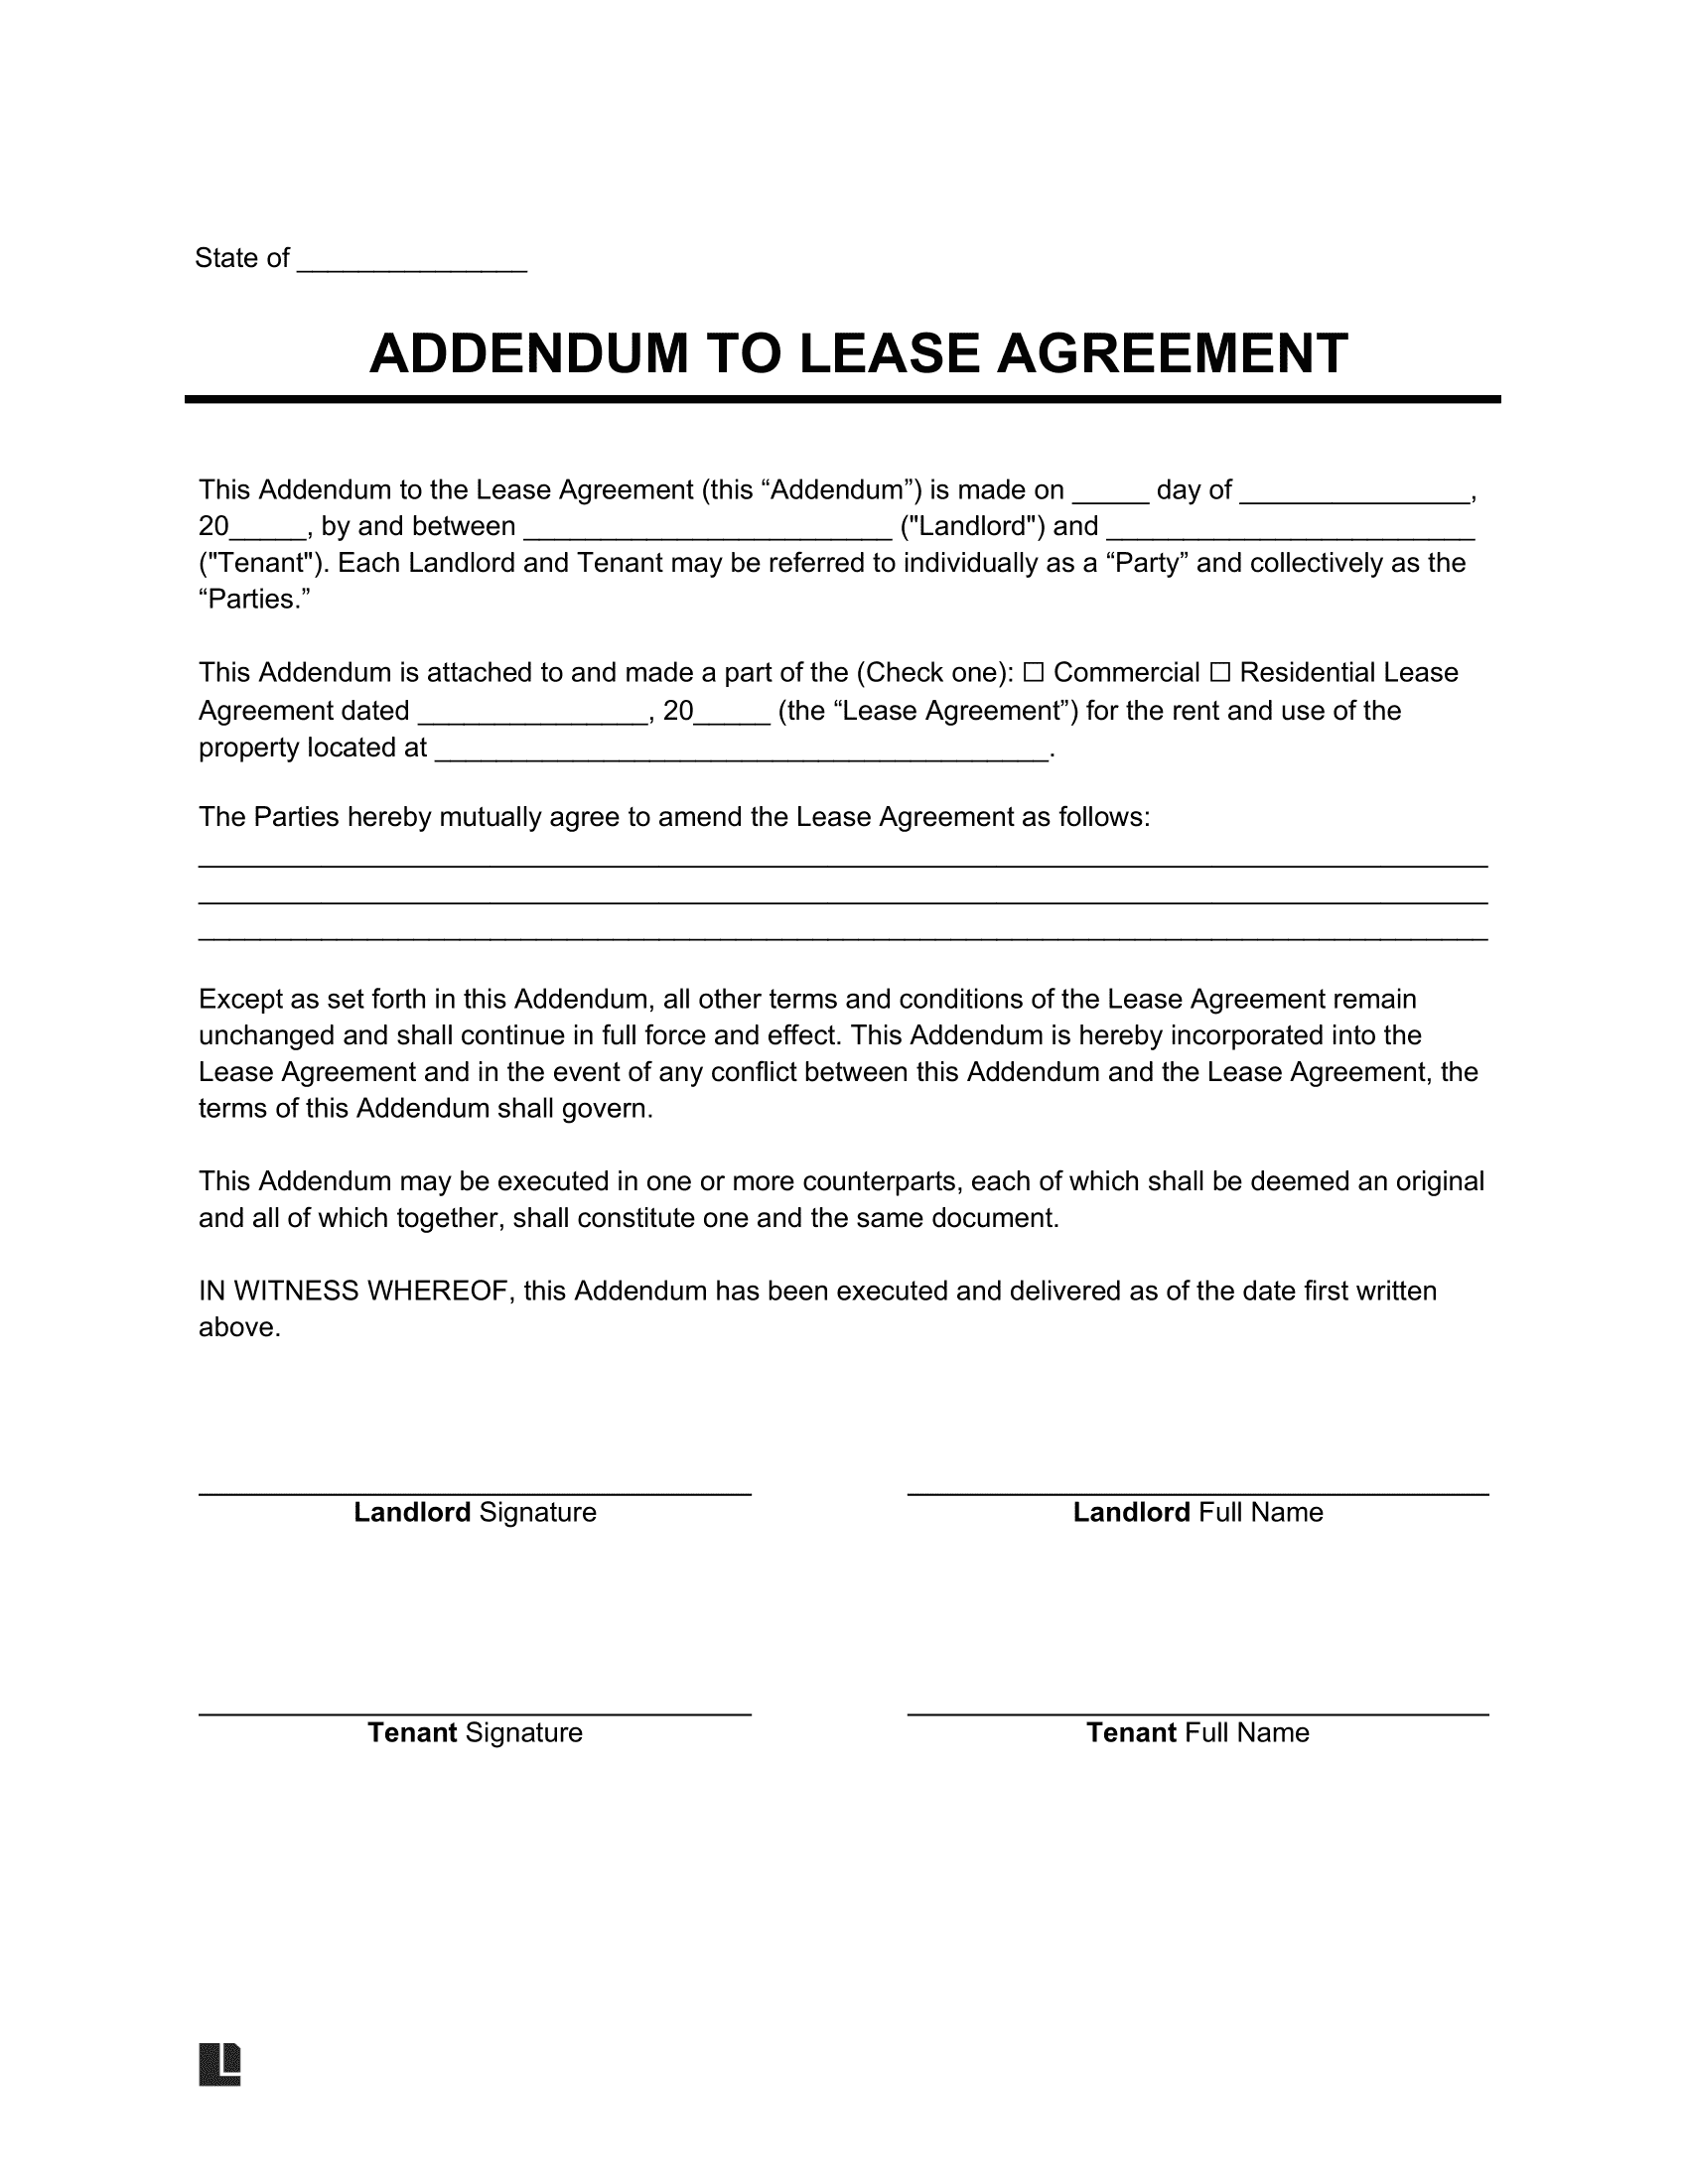 addendum to lease agreement template